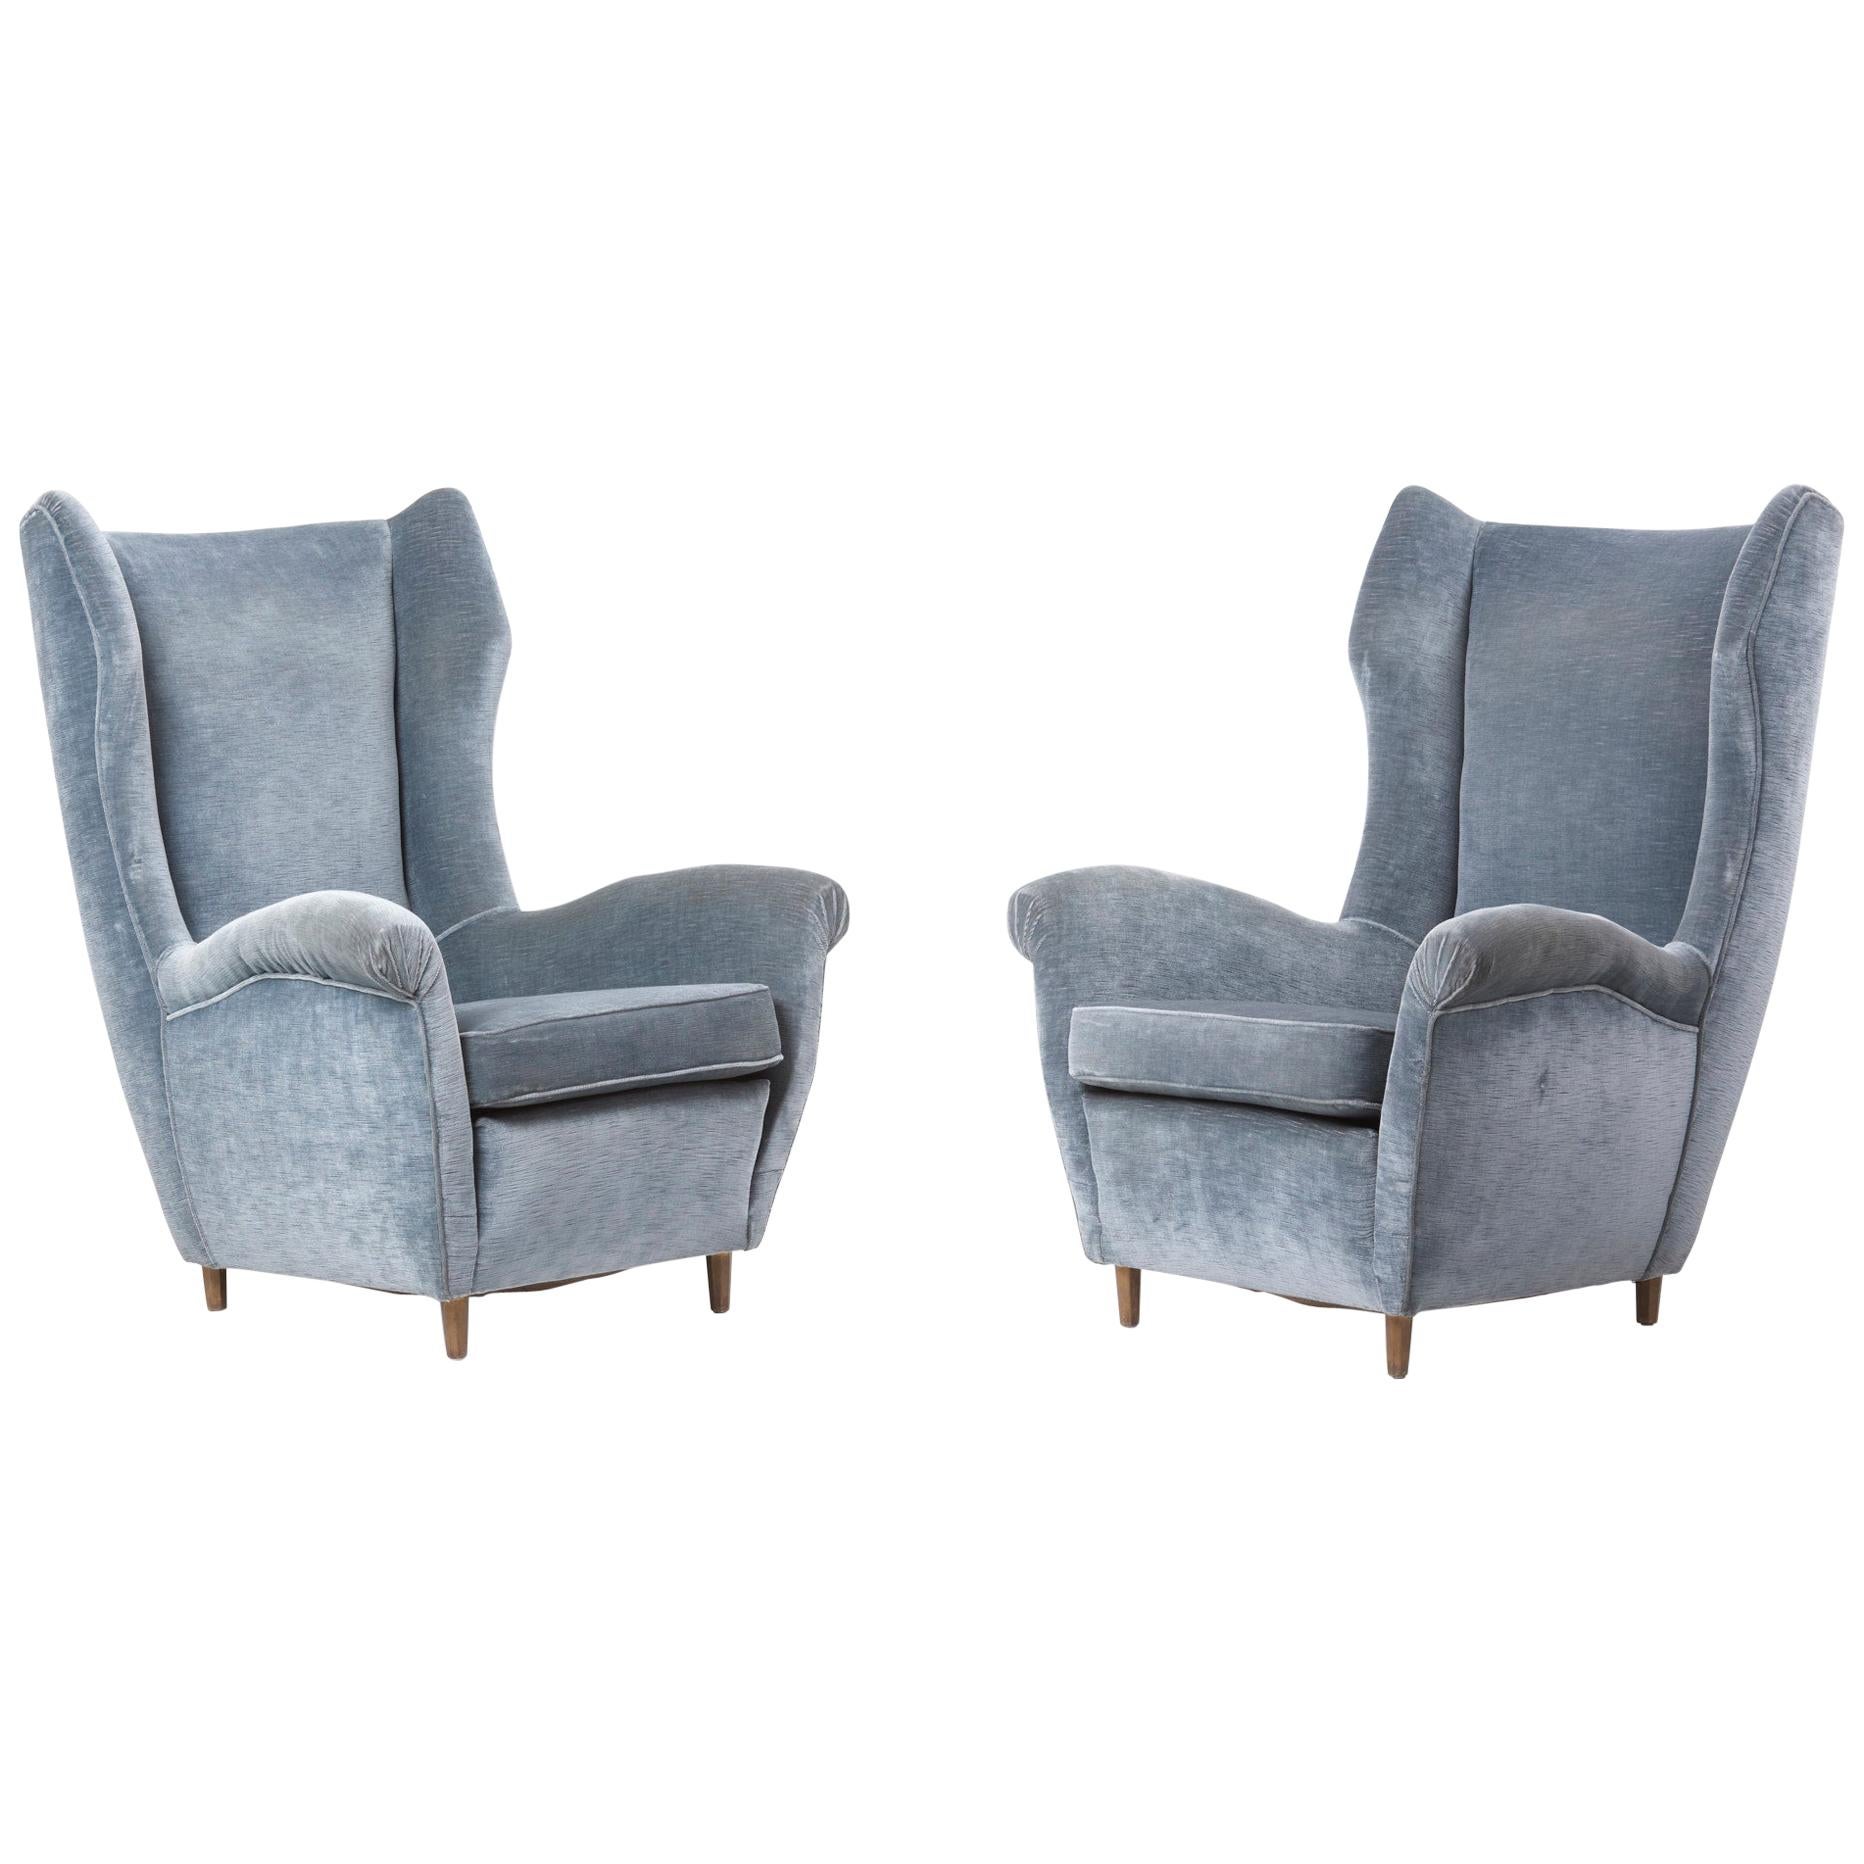 Pair of Wing Back Lounge Chairs in blueish Velvet, Italy, 1950s